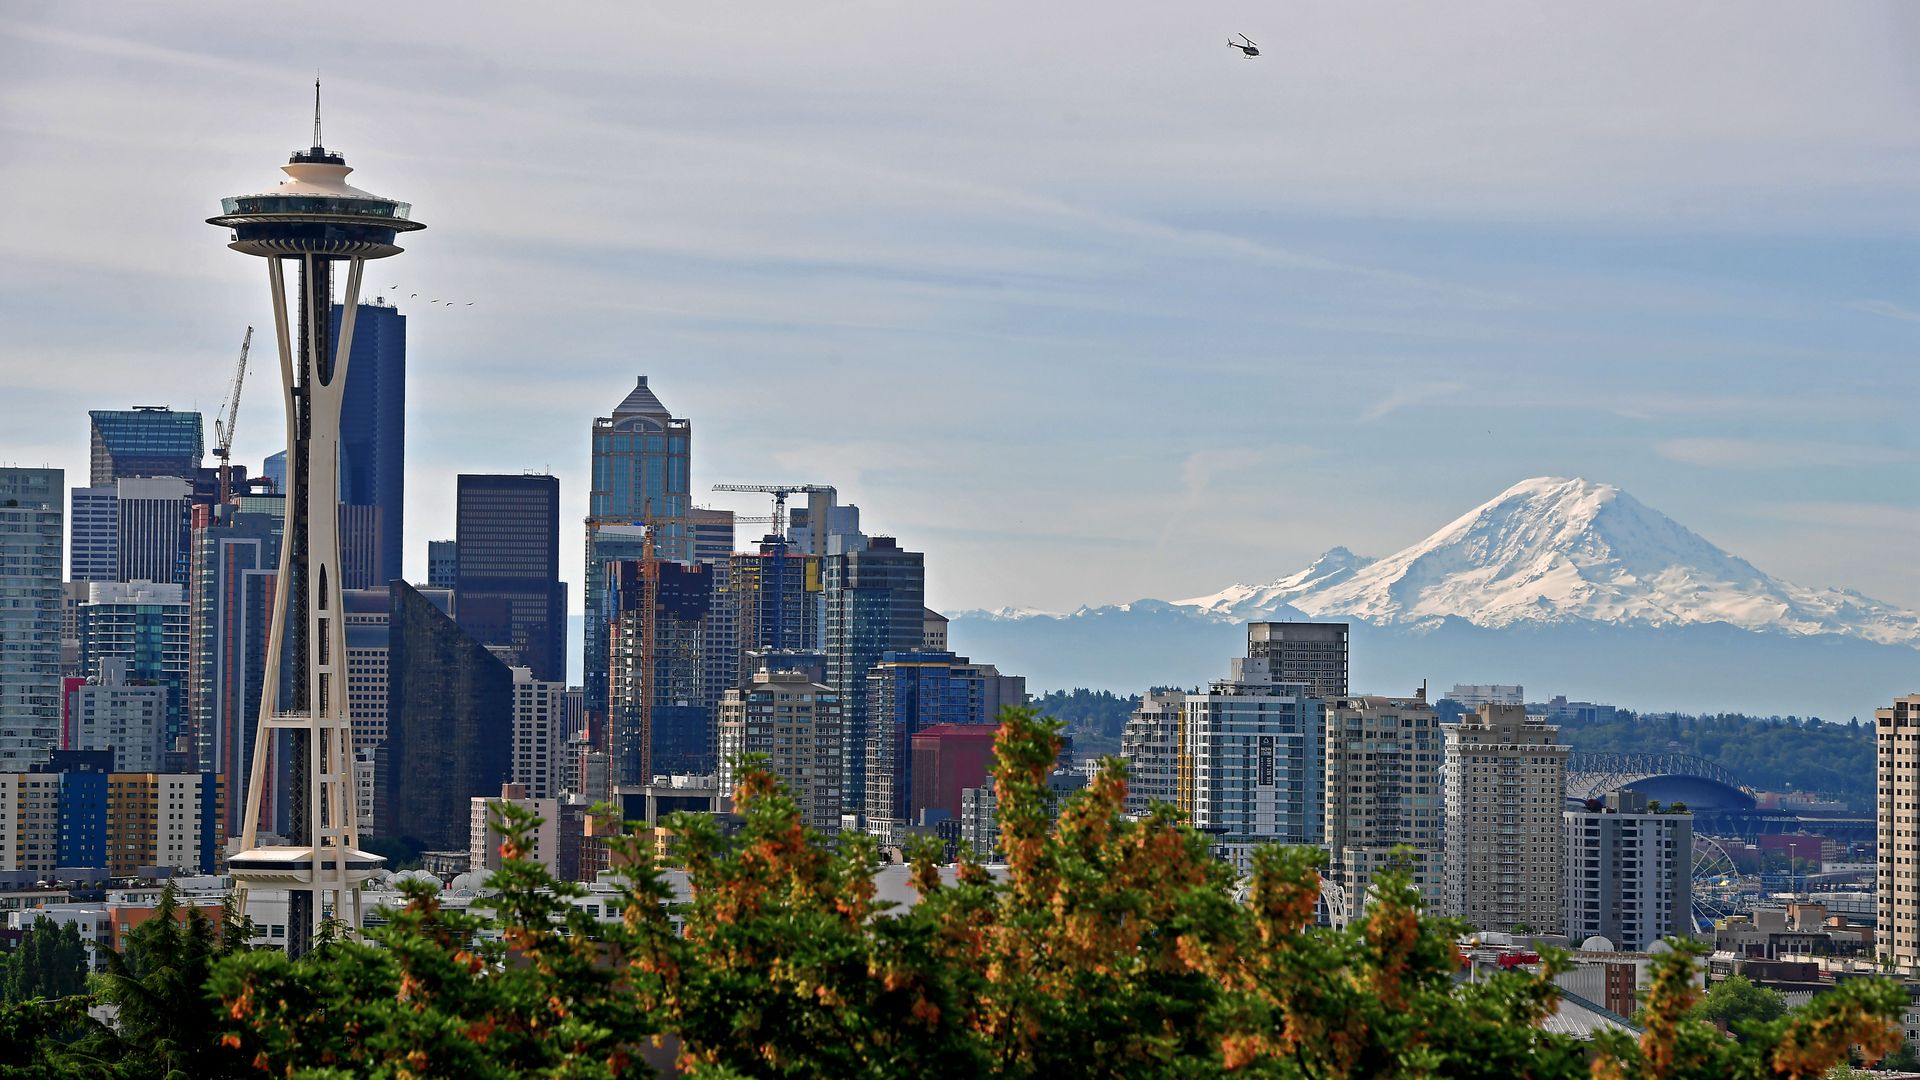 Seattle's skyline is shown with the Space Needle in the foreground and a snowy Mount Rainier visible in the background.